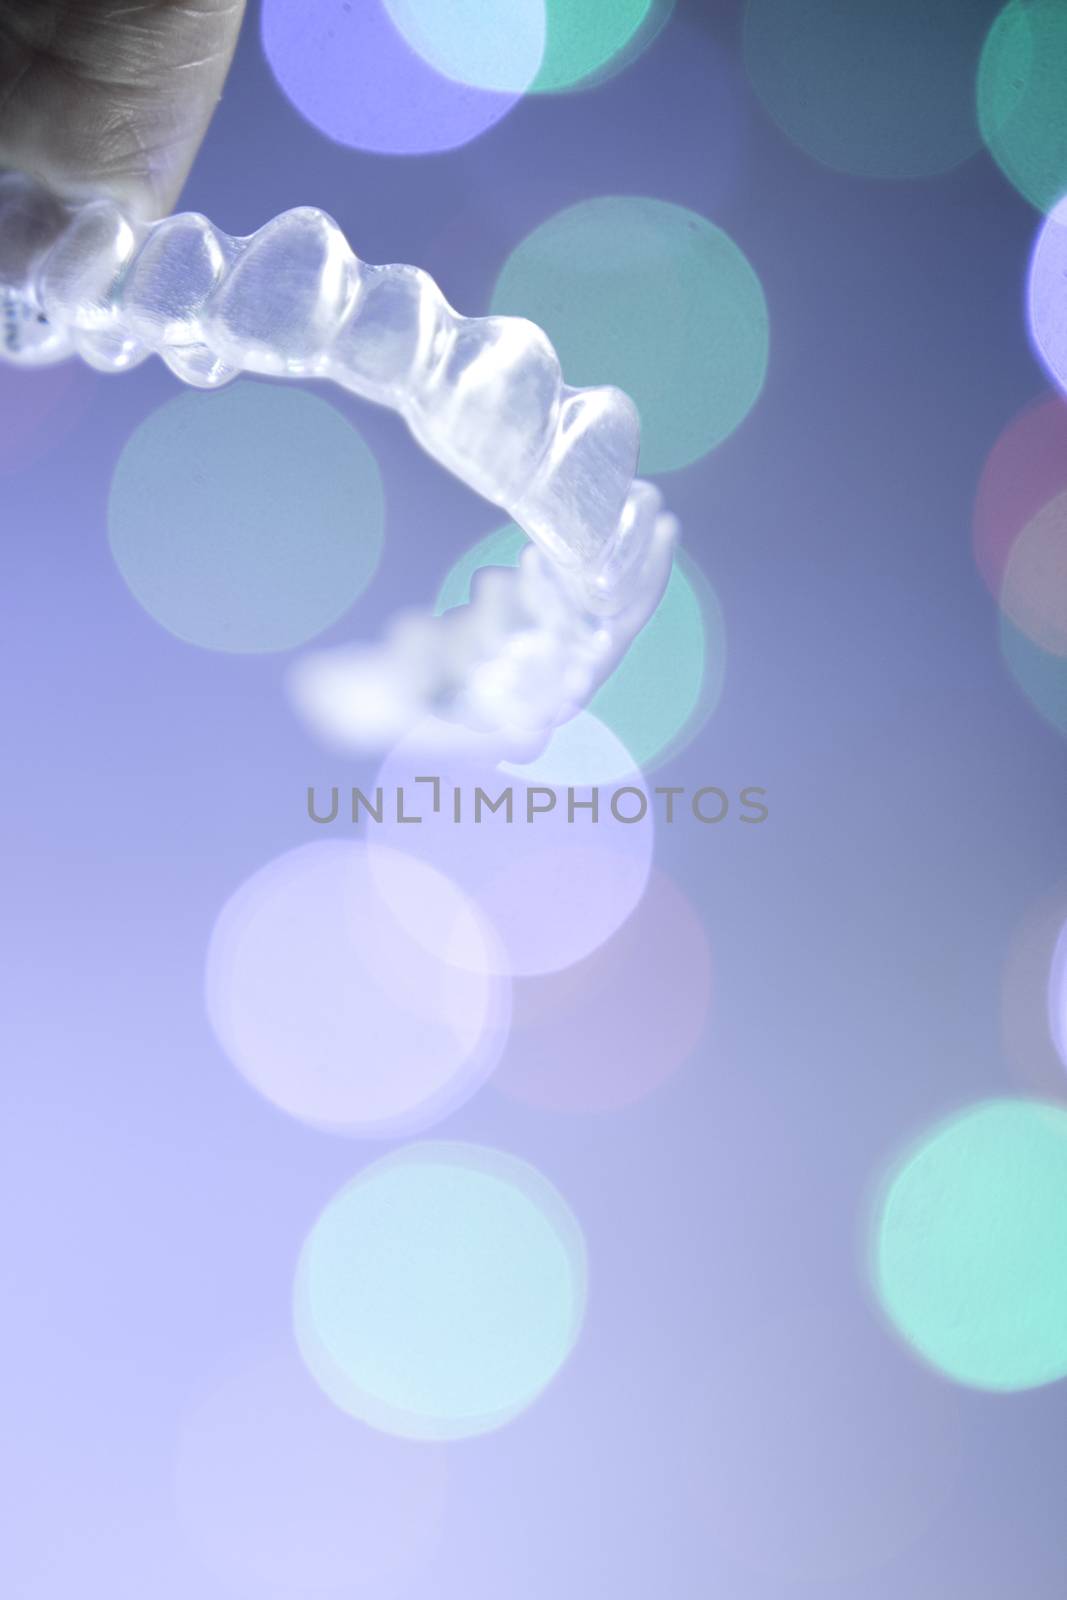 Invisible orthodontics on bokeh background by GemaIbarra